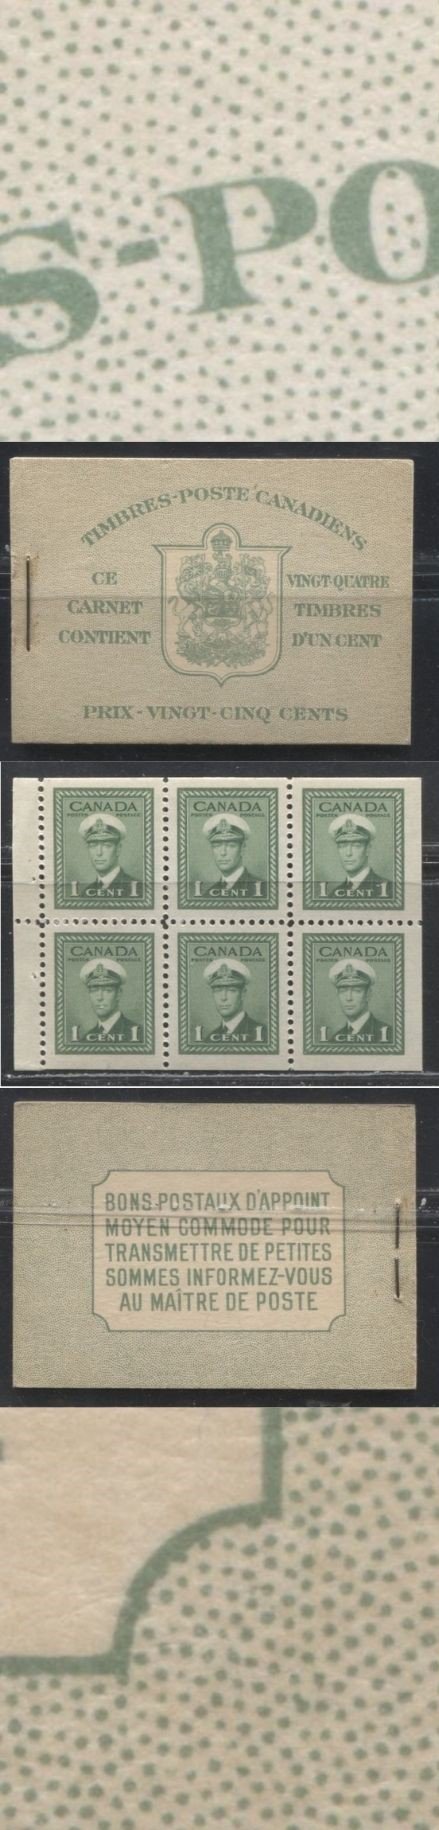 Lot 241 Canada #BK32d 1942-1949 War Issue, Complete French Booklet, 4 Panes of 1c Green, Smooth Wove Paper, Harris Front Cover Type IIj, Back Cover Type Dii, 7c & 6c Airmail Rates Page